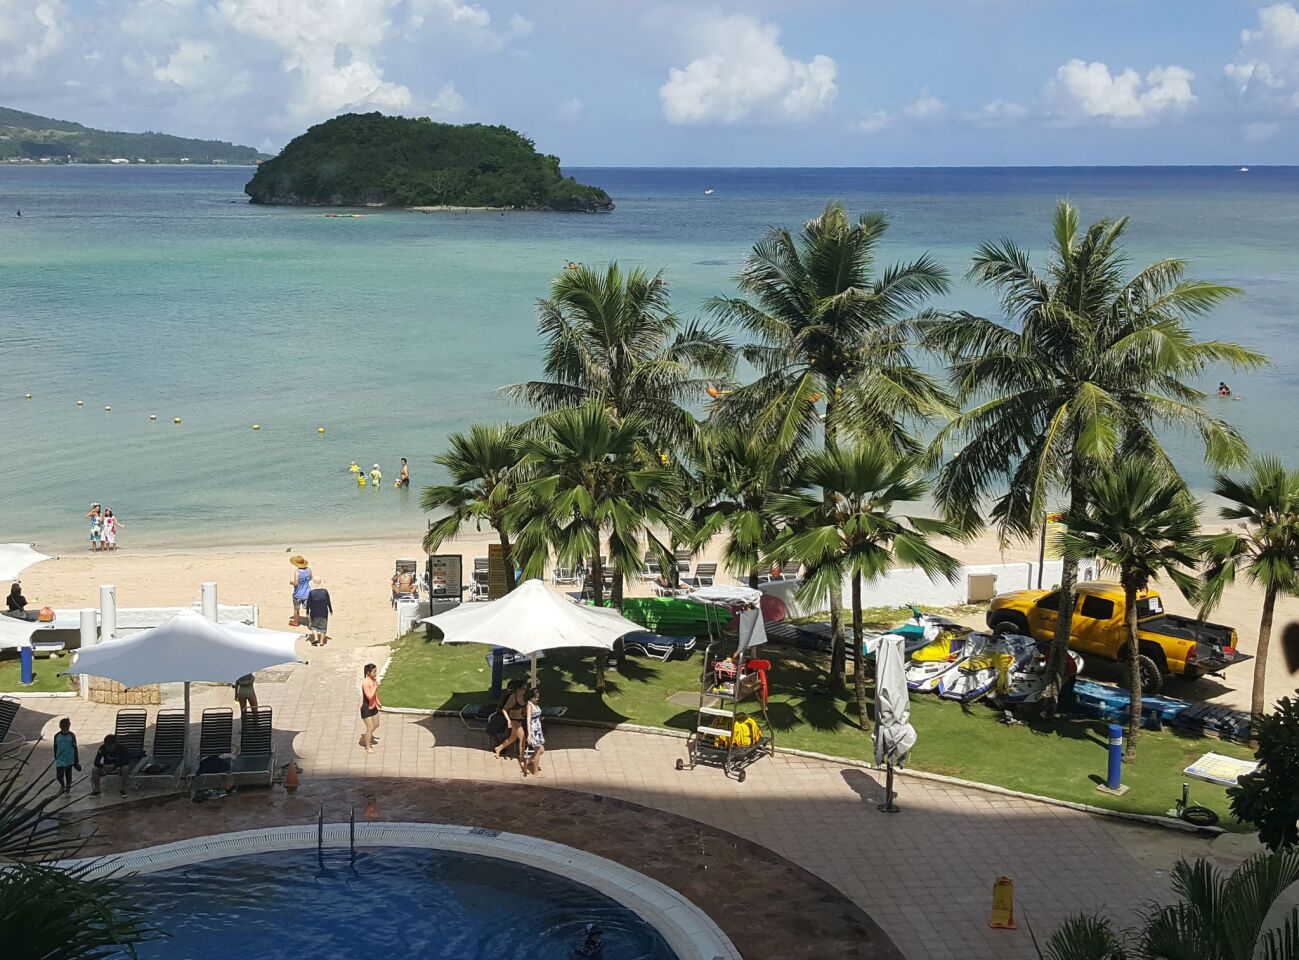 Tourists on a beach in Guam's capital Hagatna. Security and defense officials on Guam said that there is no imminent threat to people there or in the Northern Mariana Islands after North Korea said it was examining its operational plans for attack.